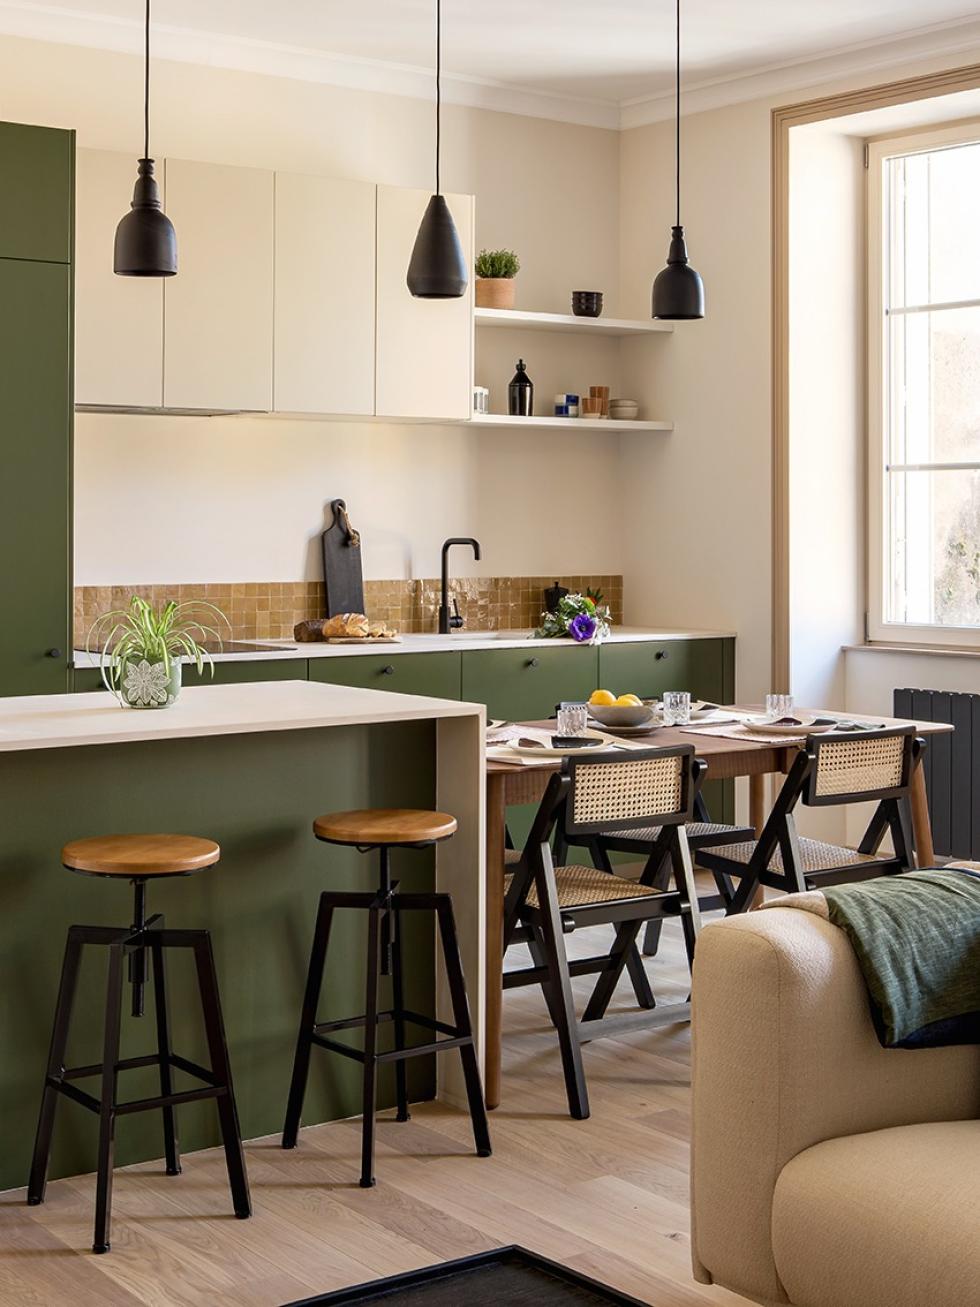 An Olive and Lin kitchen by Lala Home